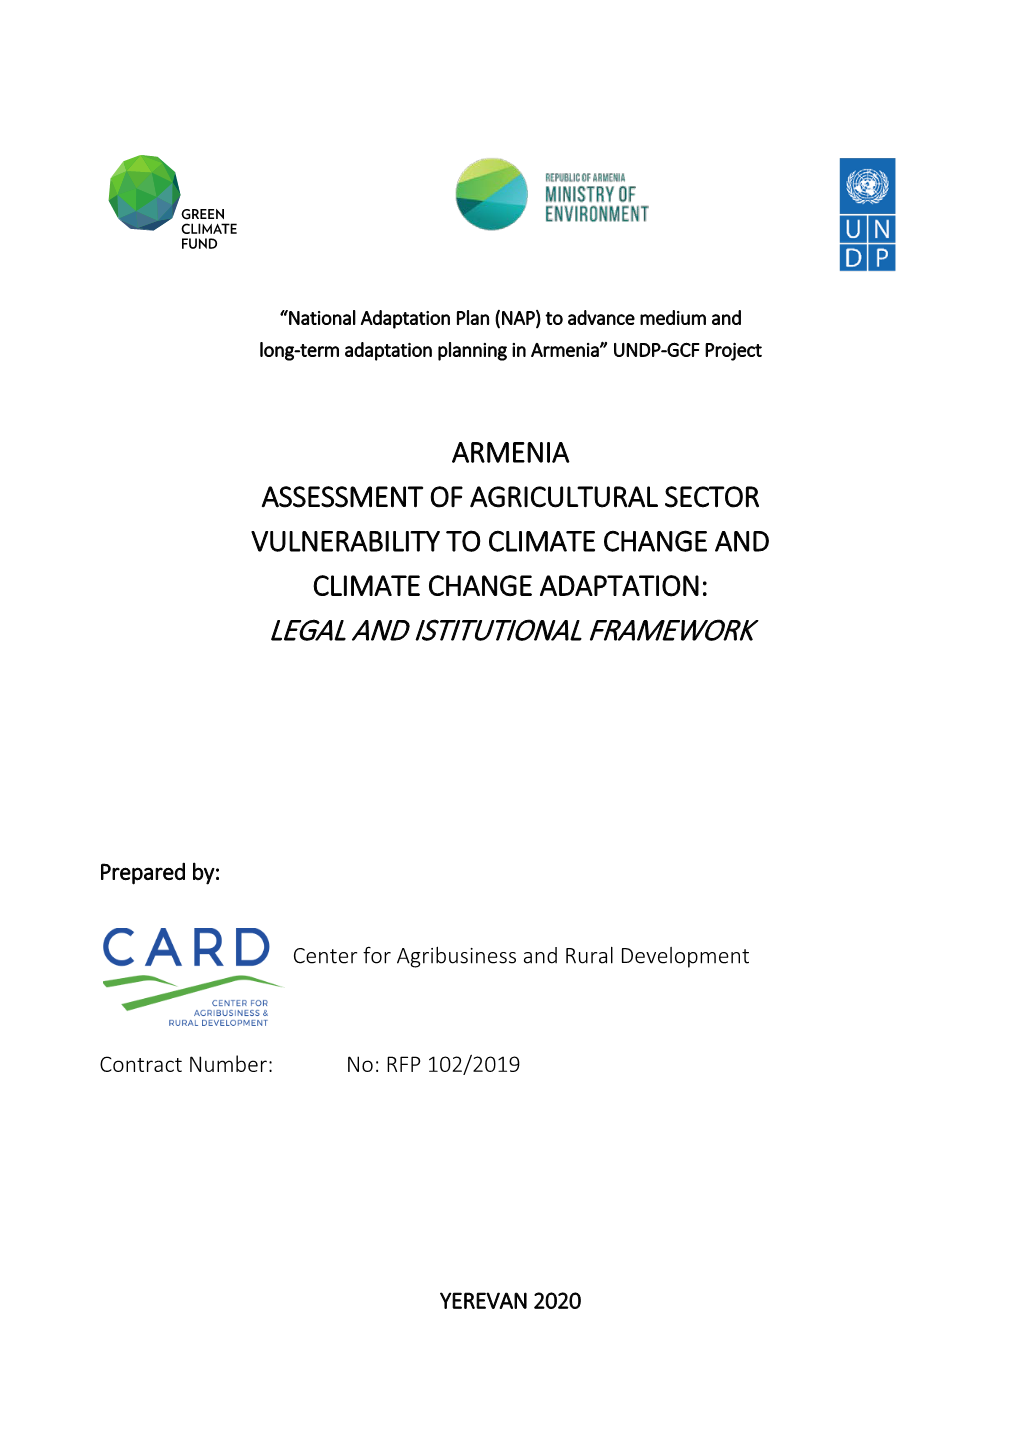 Assessment of Agricultural Sector Vulnerability to Climate Change and Climate Change Adaptation: Legal and Istitutional Framework